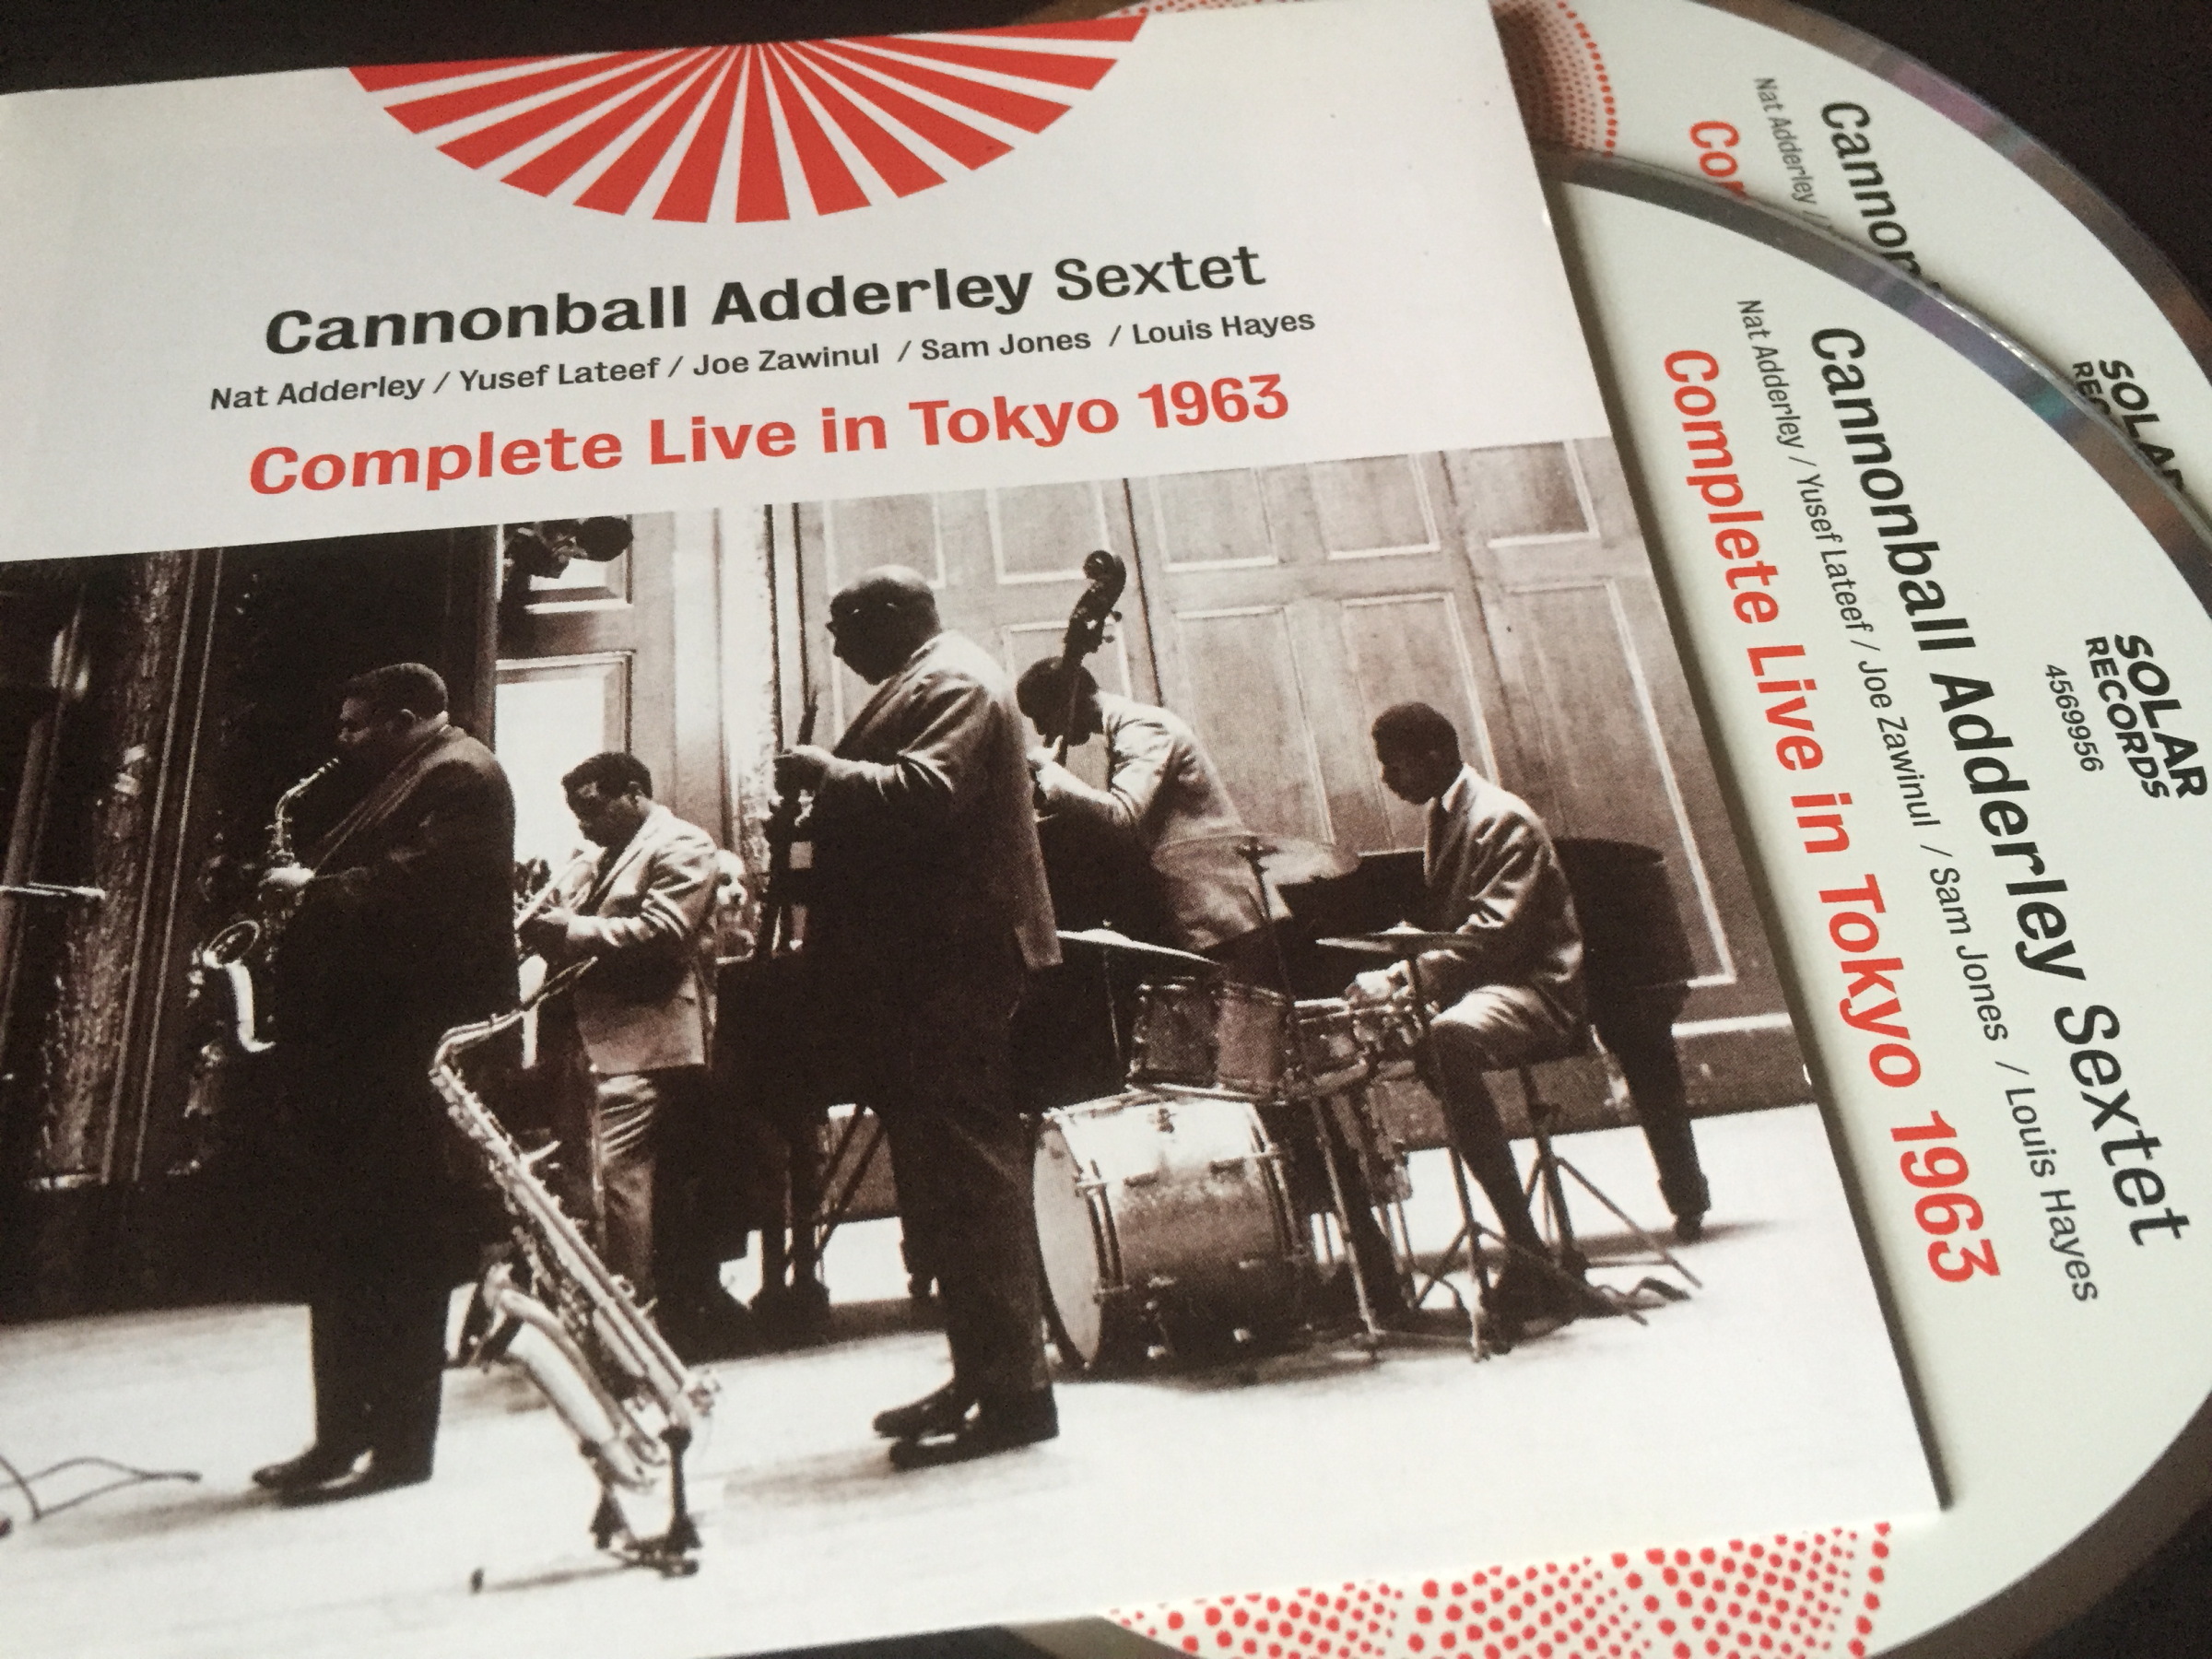 Cannonball Adderley / Complete Live In Tokyo 1963: 日々JAZZ的な生活